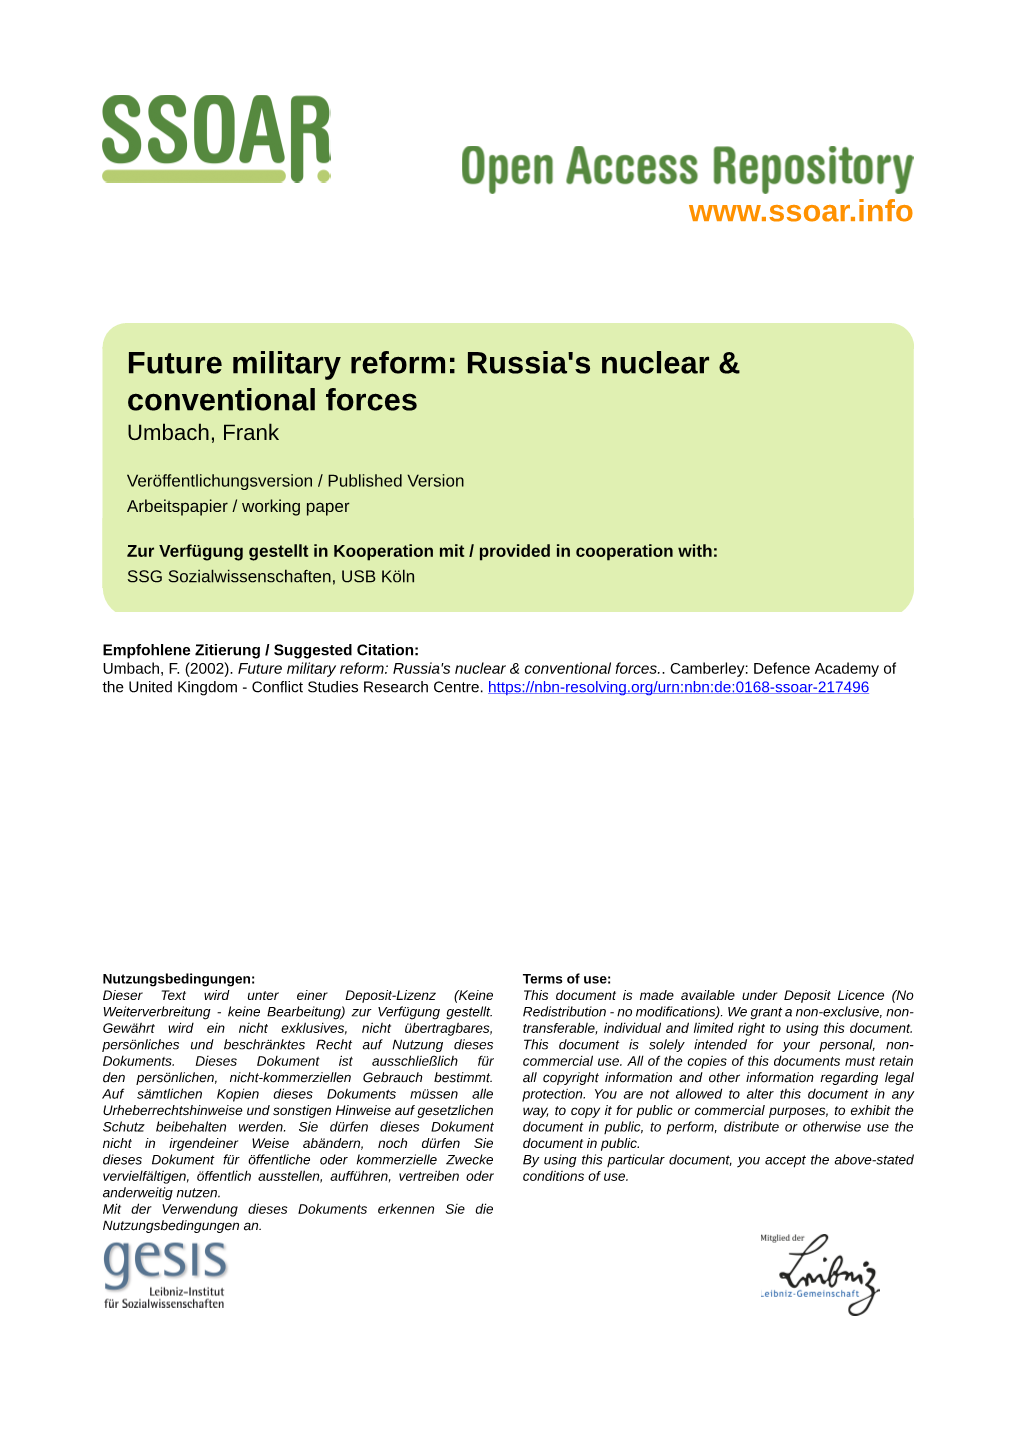 Future Military Reform: Russia's Nuclear & Conventional Forces